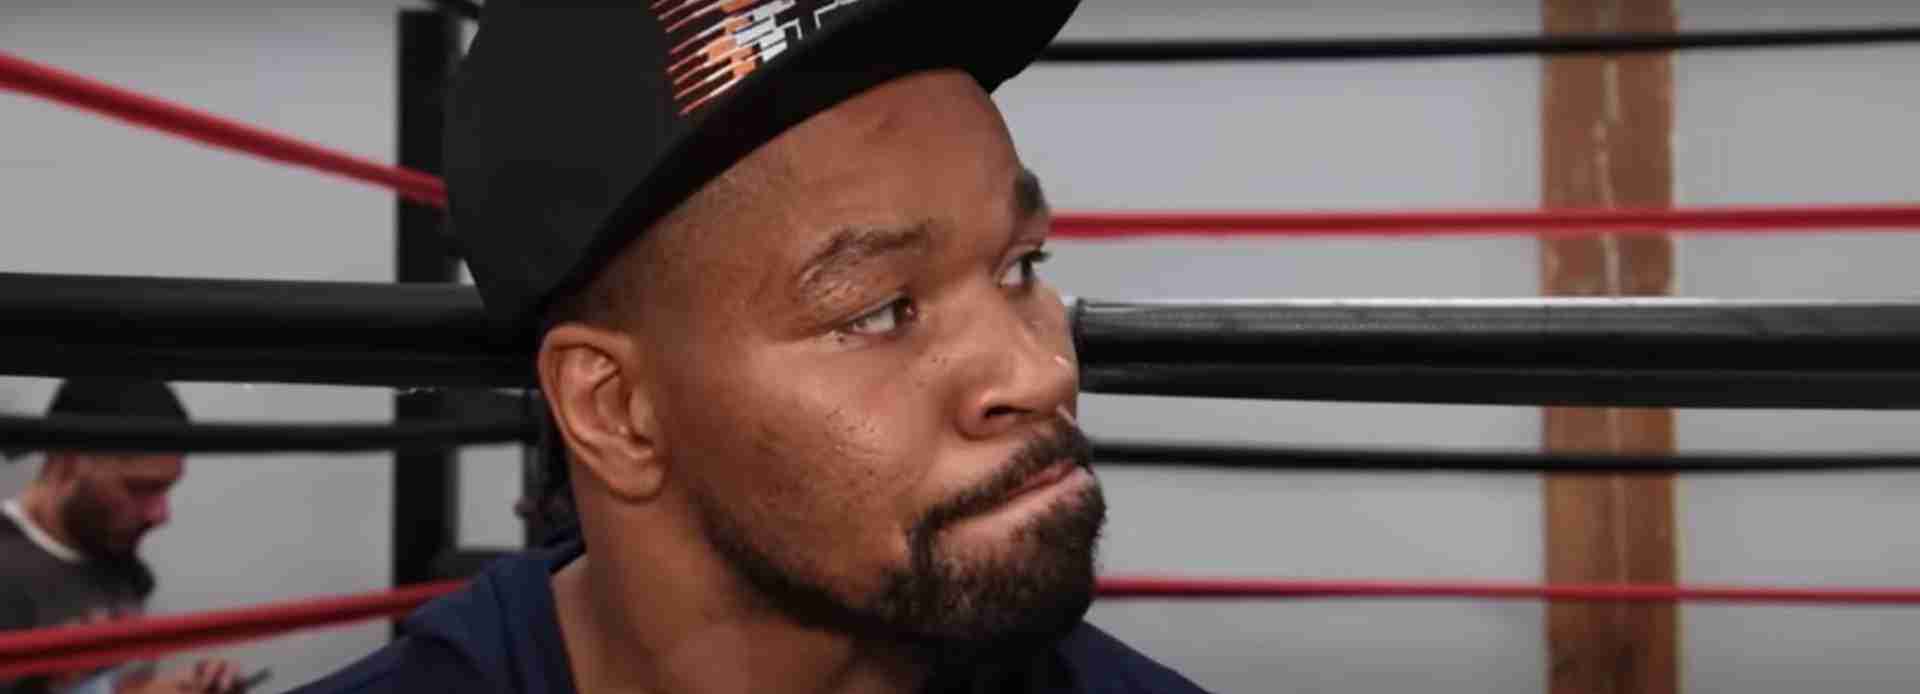 Watch: Shawn Porter On He Thinks Why Jake Paul Chose Son Of Heavyweight Champion